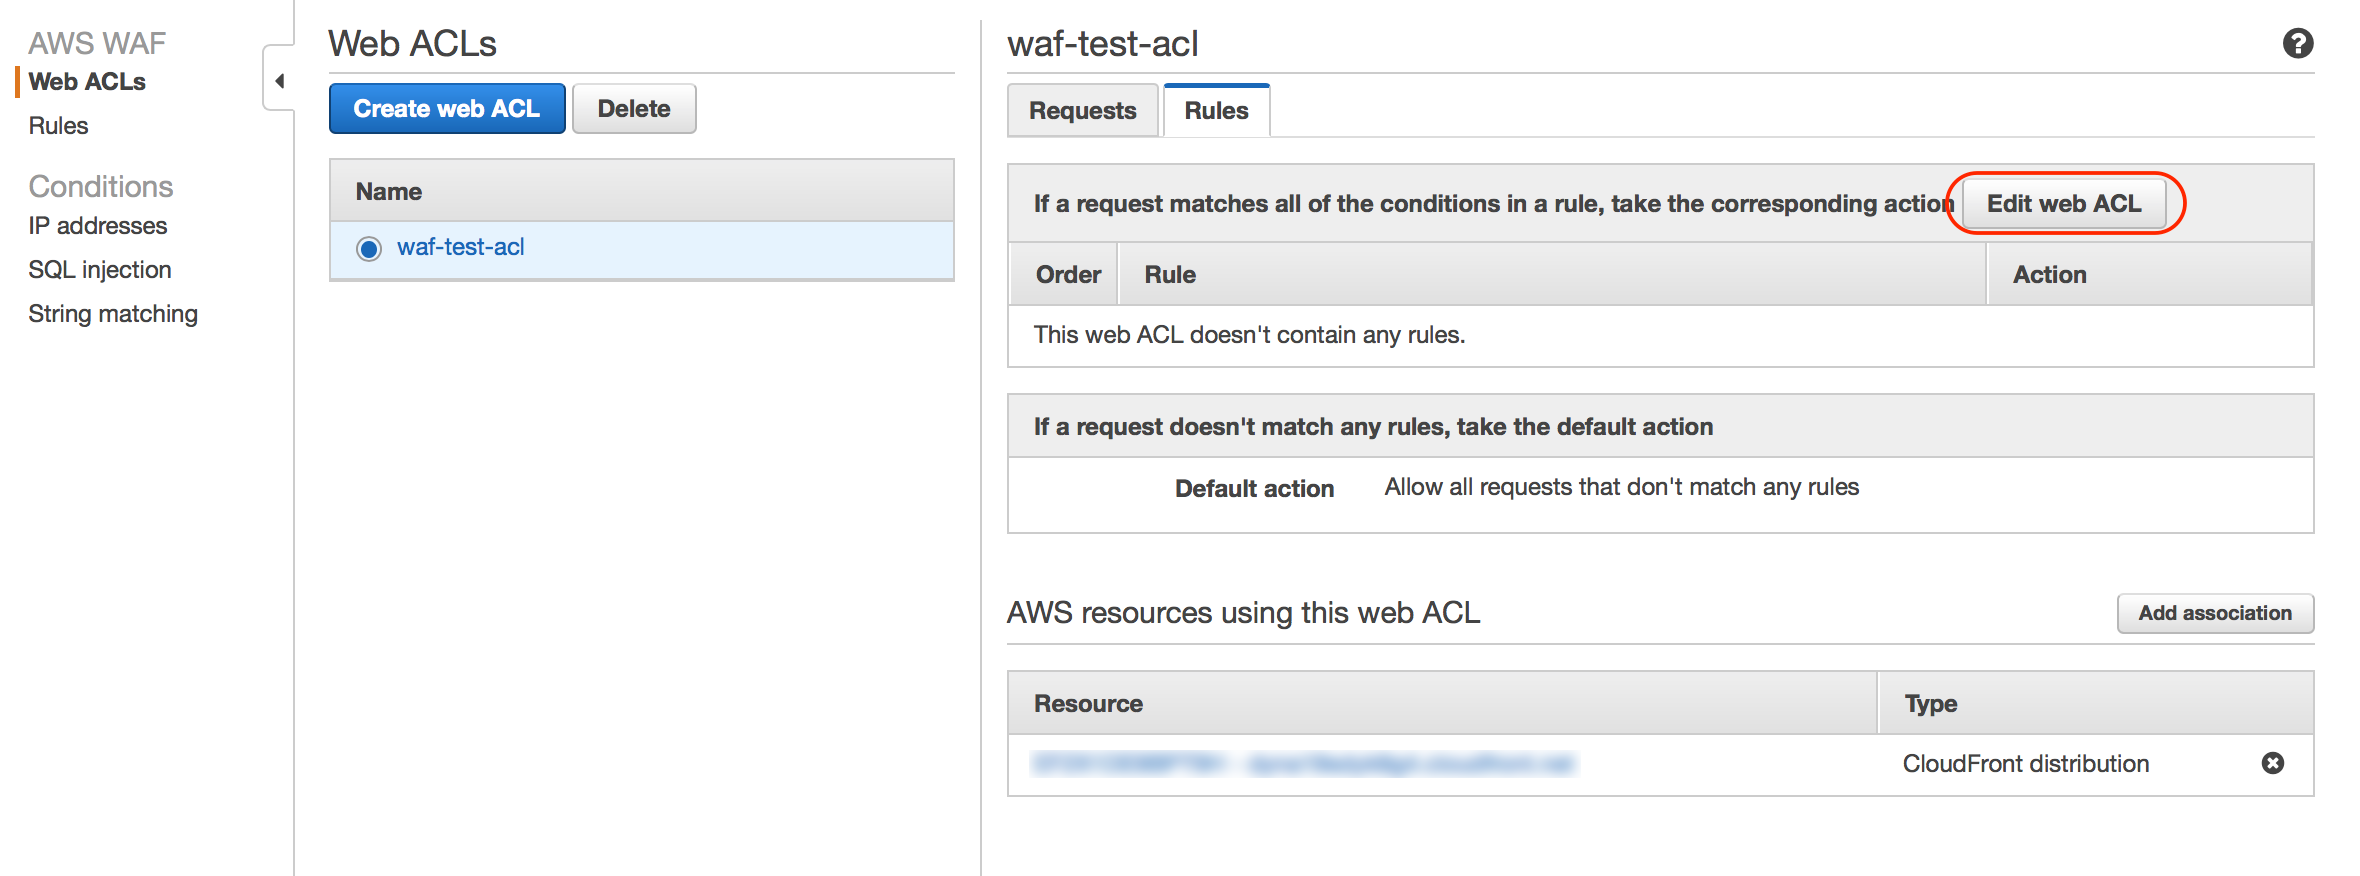 aws-waf_sql-injection_2015120410-1.png